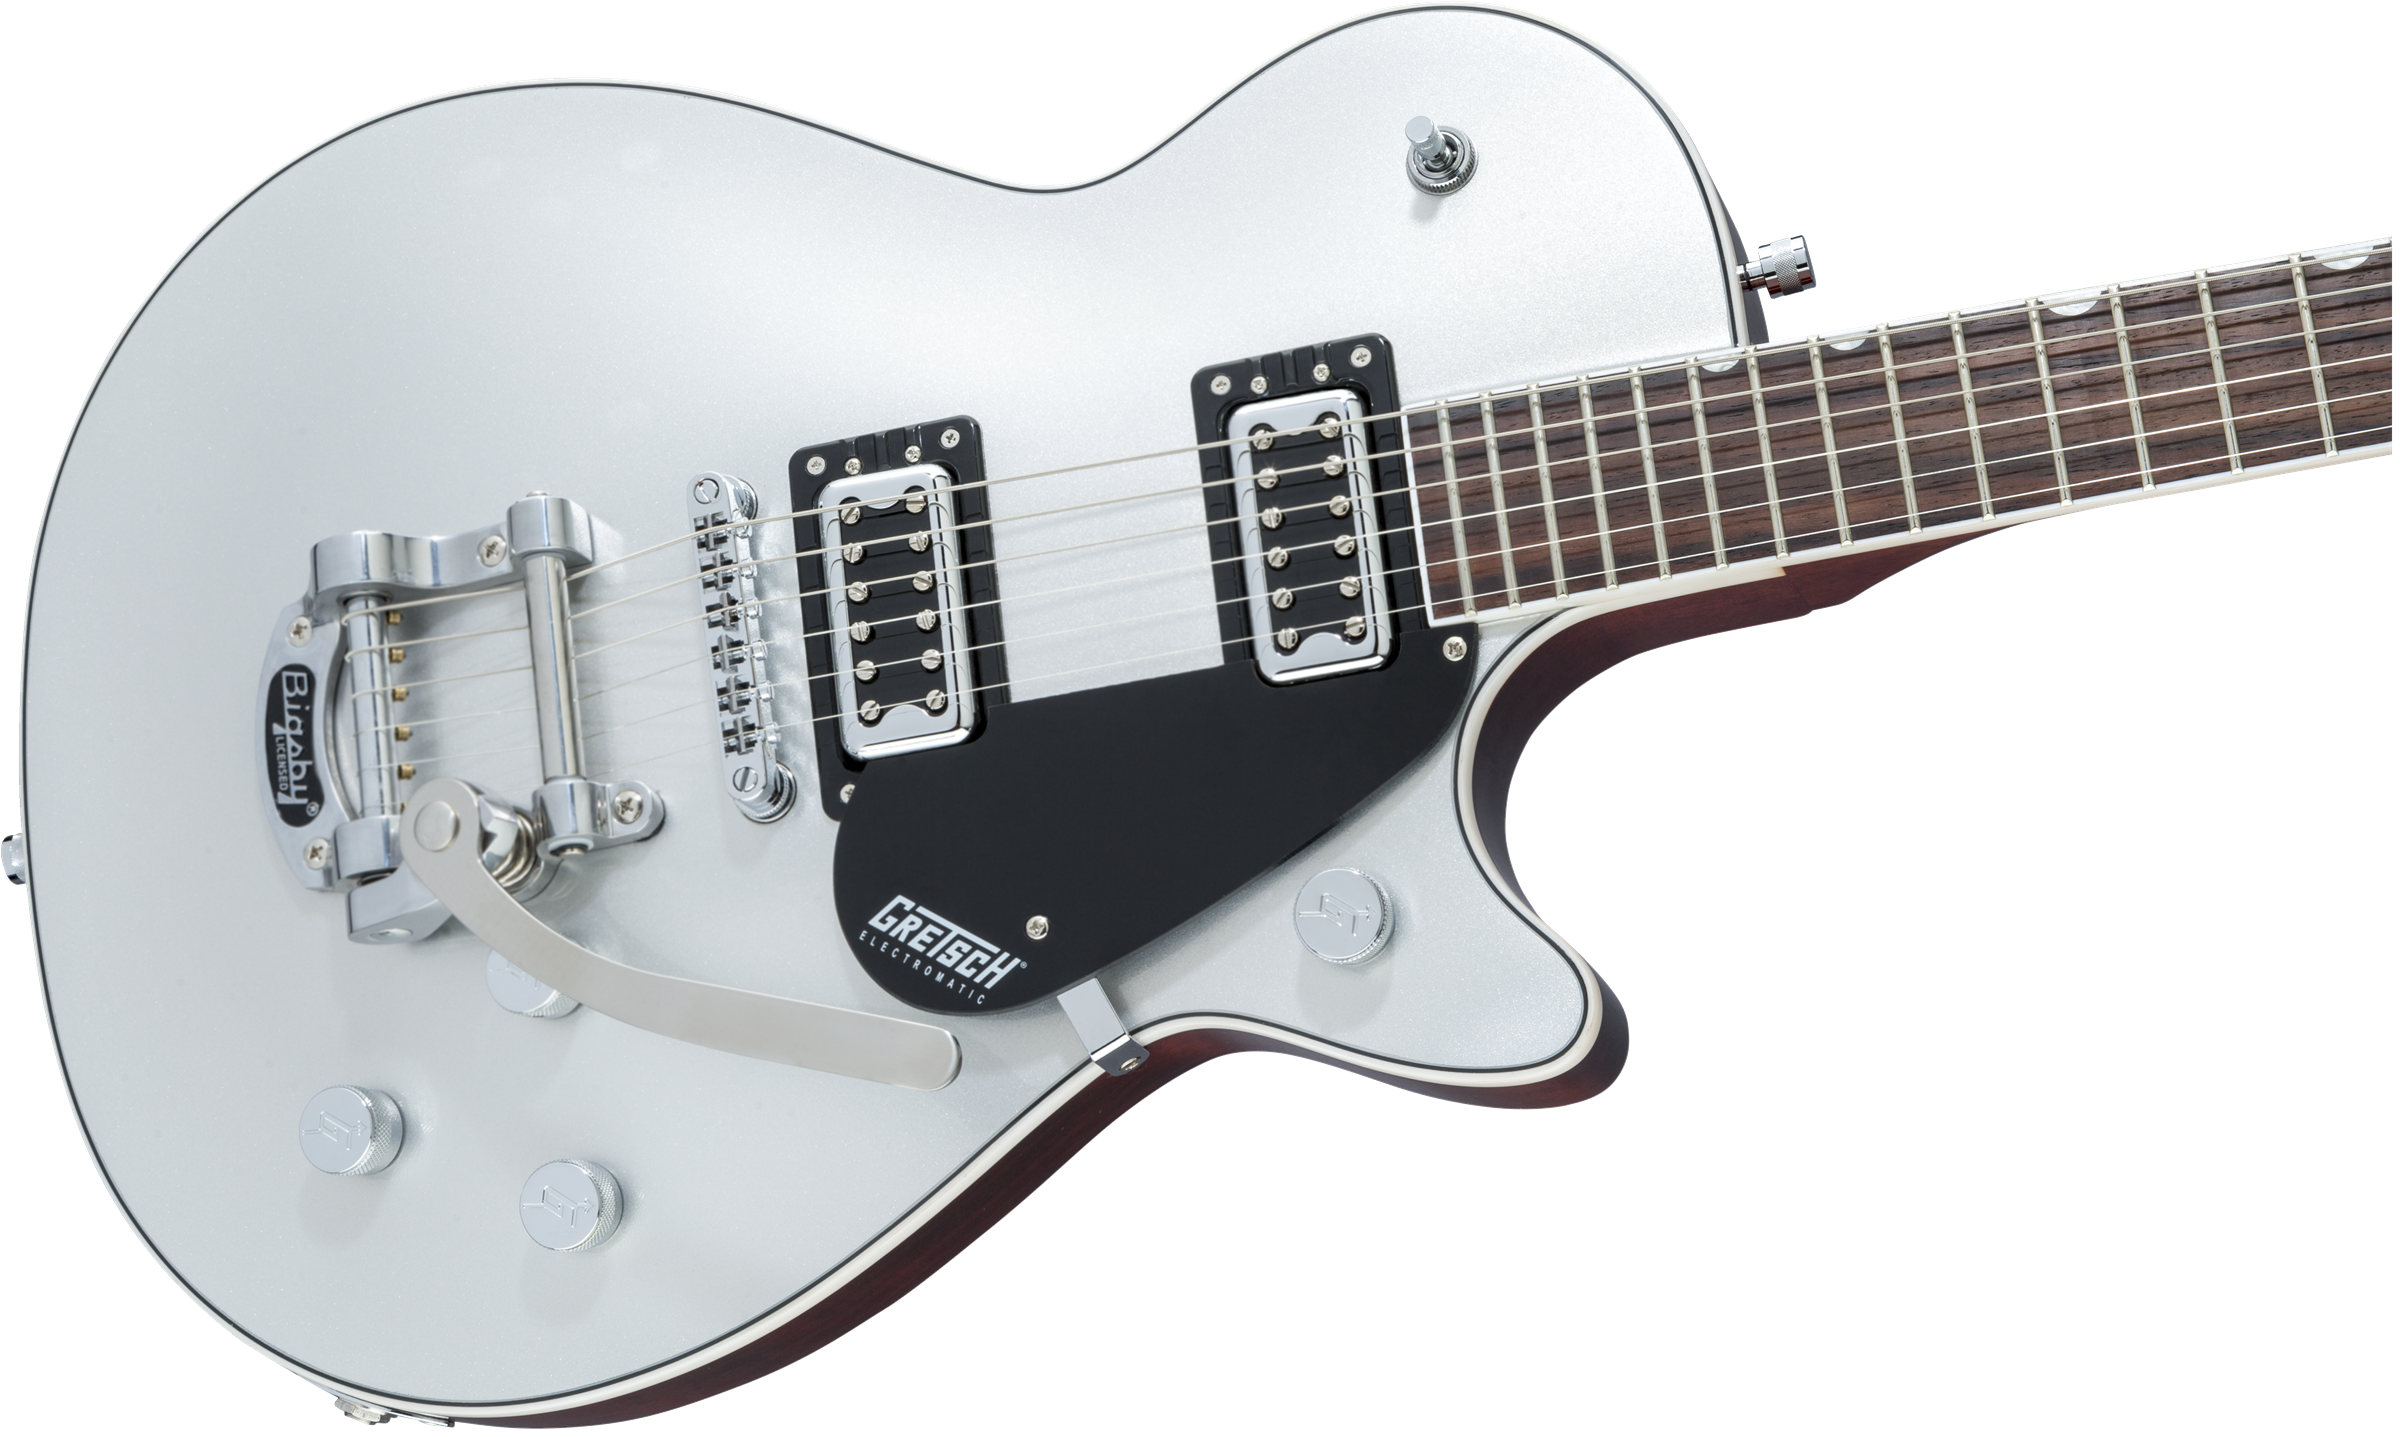 Gretsch G5230t Electromatic Jet Ft Single-cut Bigsby Hh Trem Wal - Airline Silver - Single cut electric guitar - Variation 2